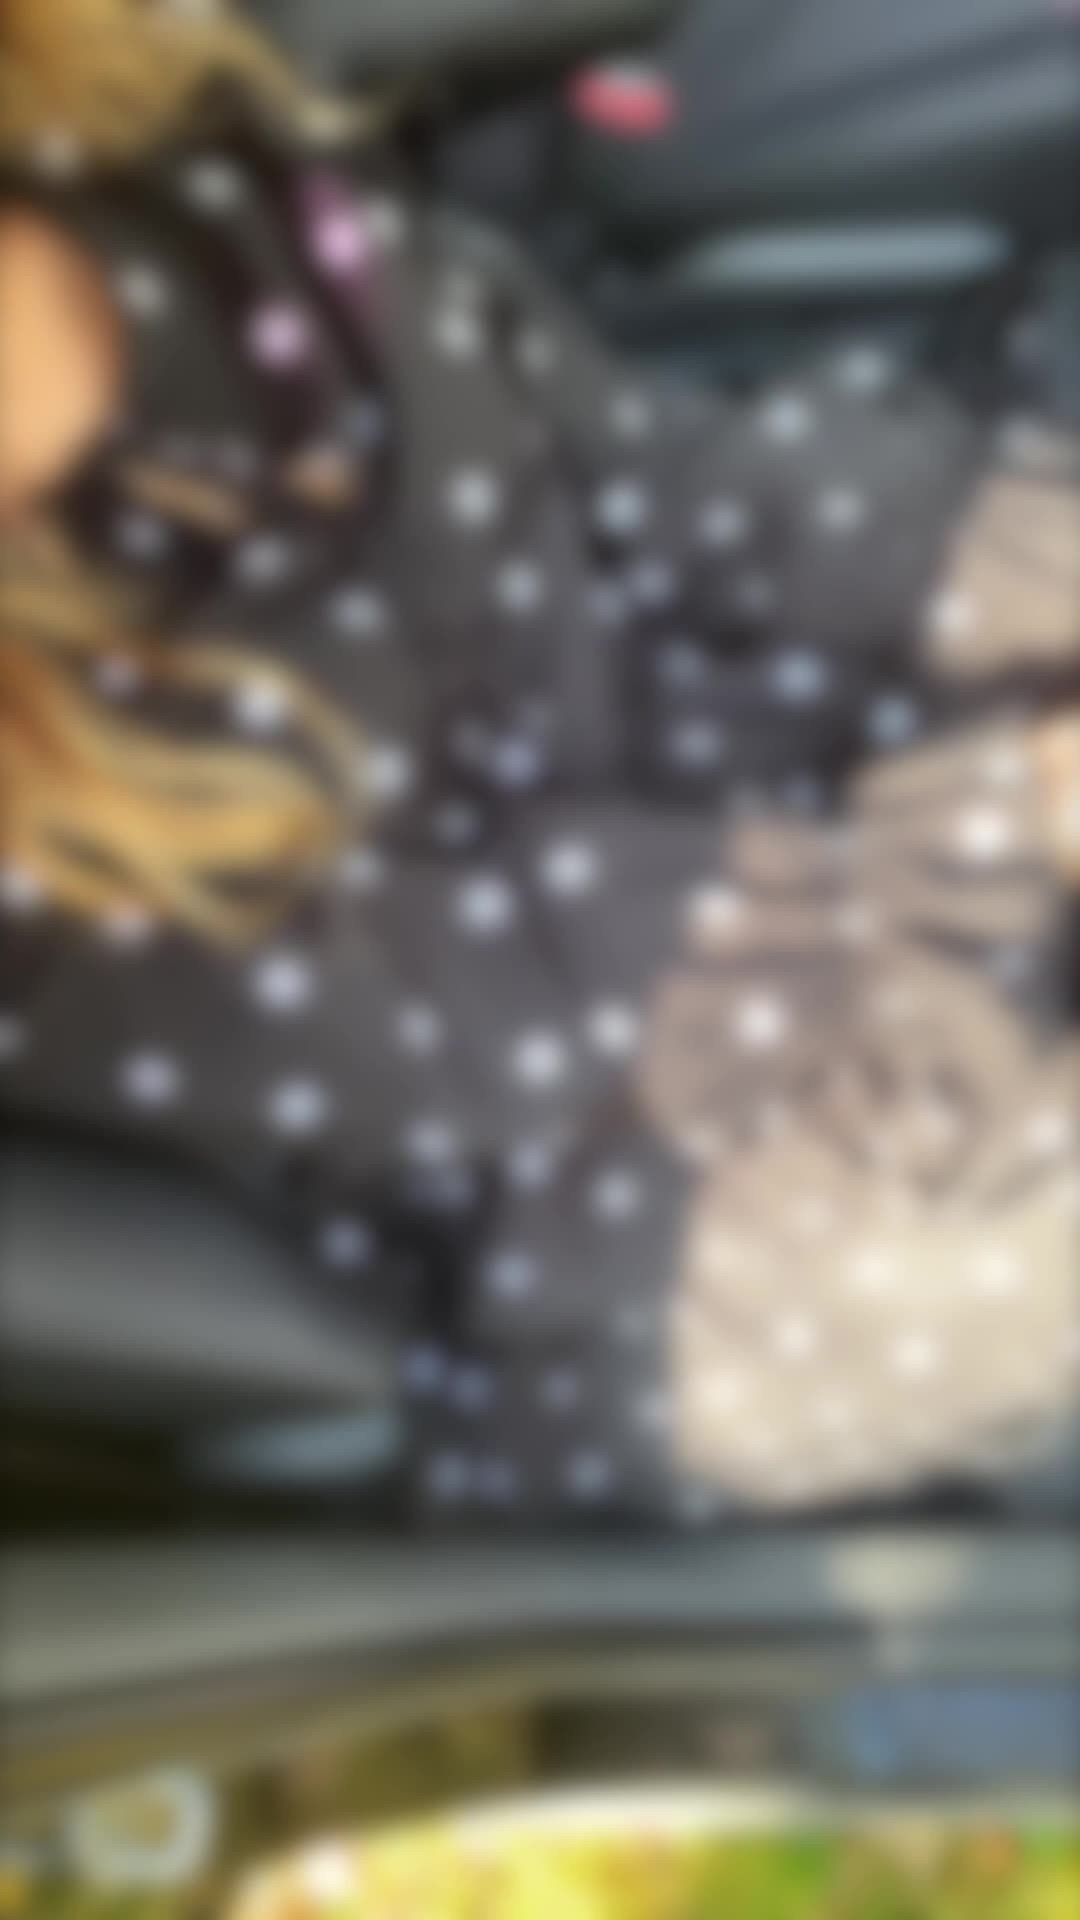 Video by Alisa Lovely with the username @alisalovely, who is a star user,  May 3, 2021 at 8:02 AM. The post is about the topic Amateurs and the text says 'Do you like stockings?😍  Want to see something interesting under my dress?😈  Follow me 👉  https://onlyfans.com/alisalovely69 
🎁Each new user a Premium 𝐗𝐗𝐗 Video as a gift!🎁'